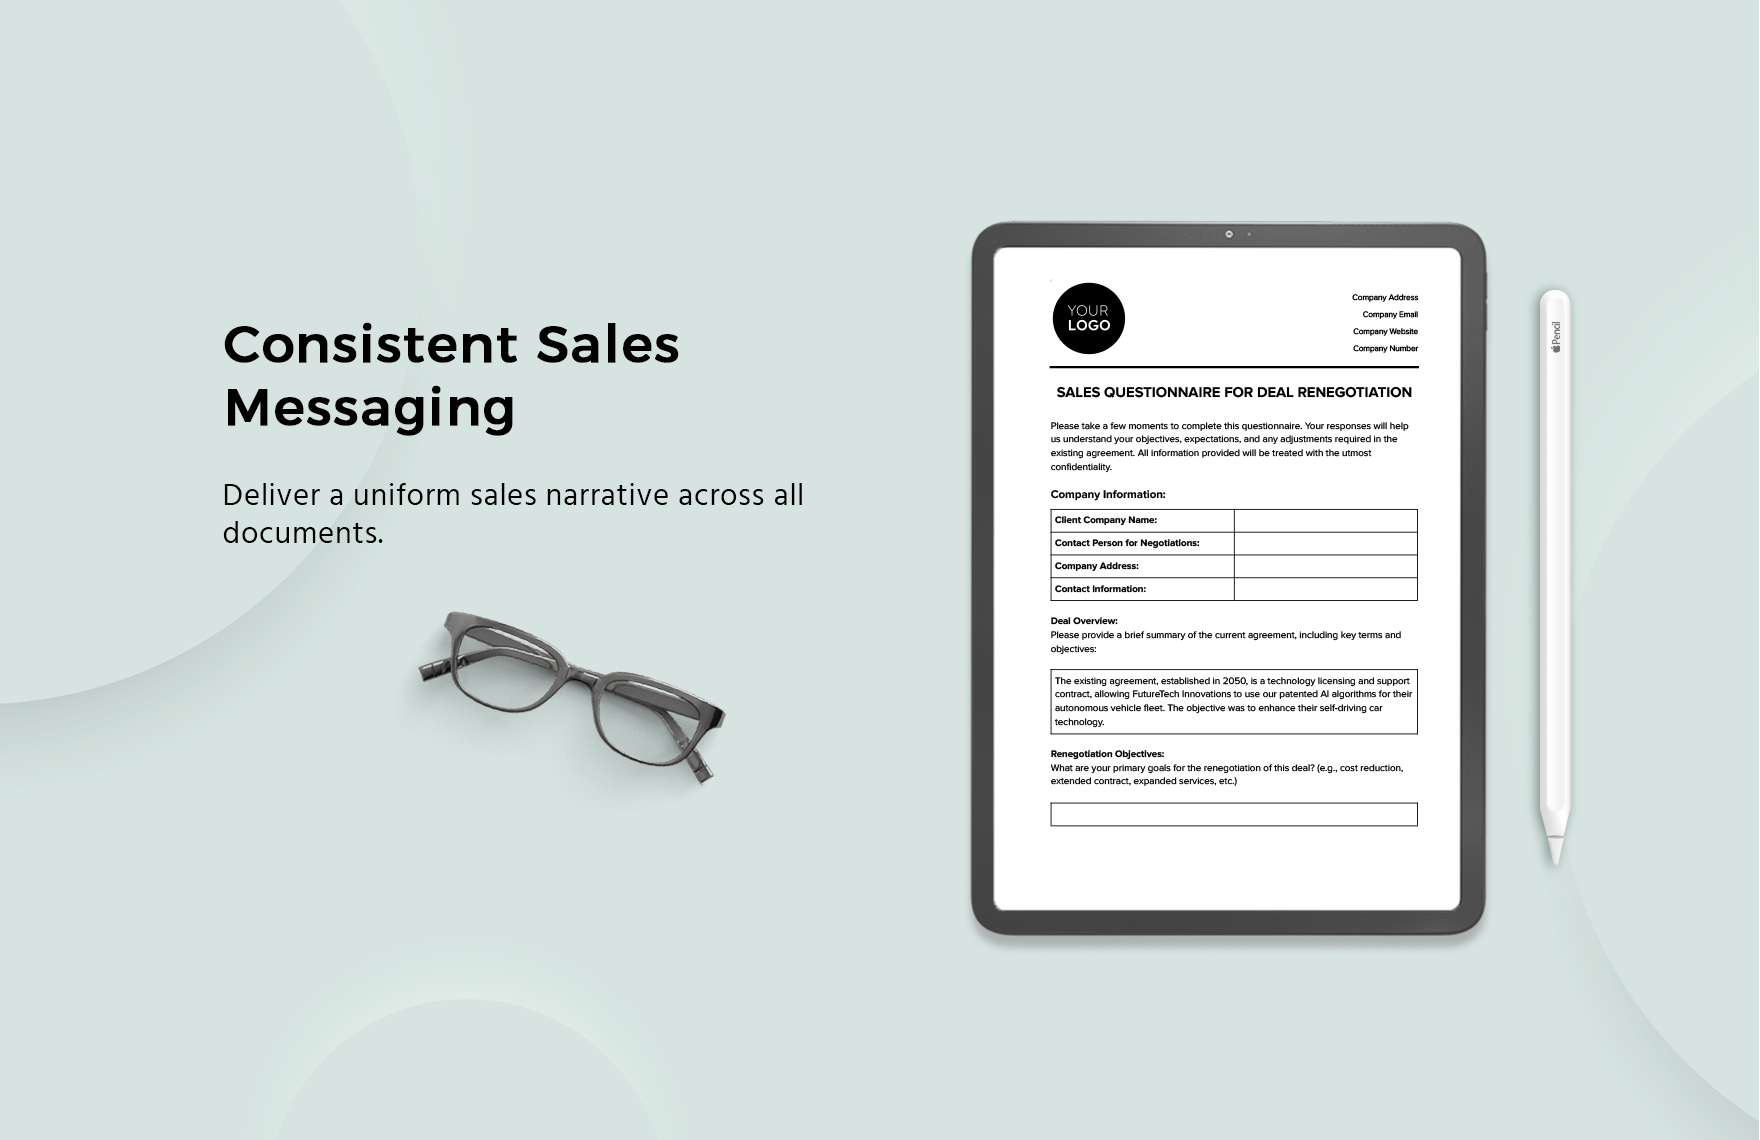 Sales Questionnaire for Deal Renegotiation Template